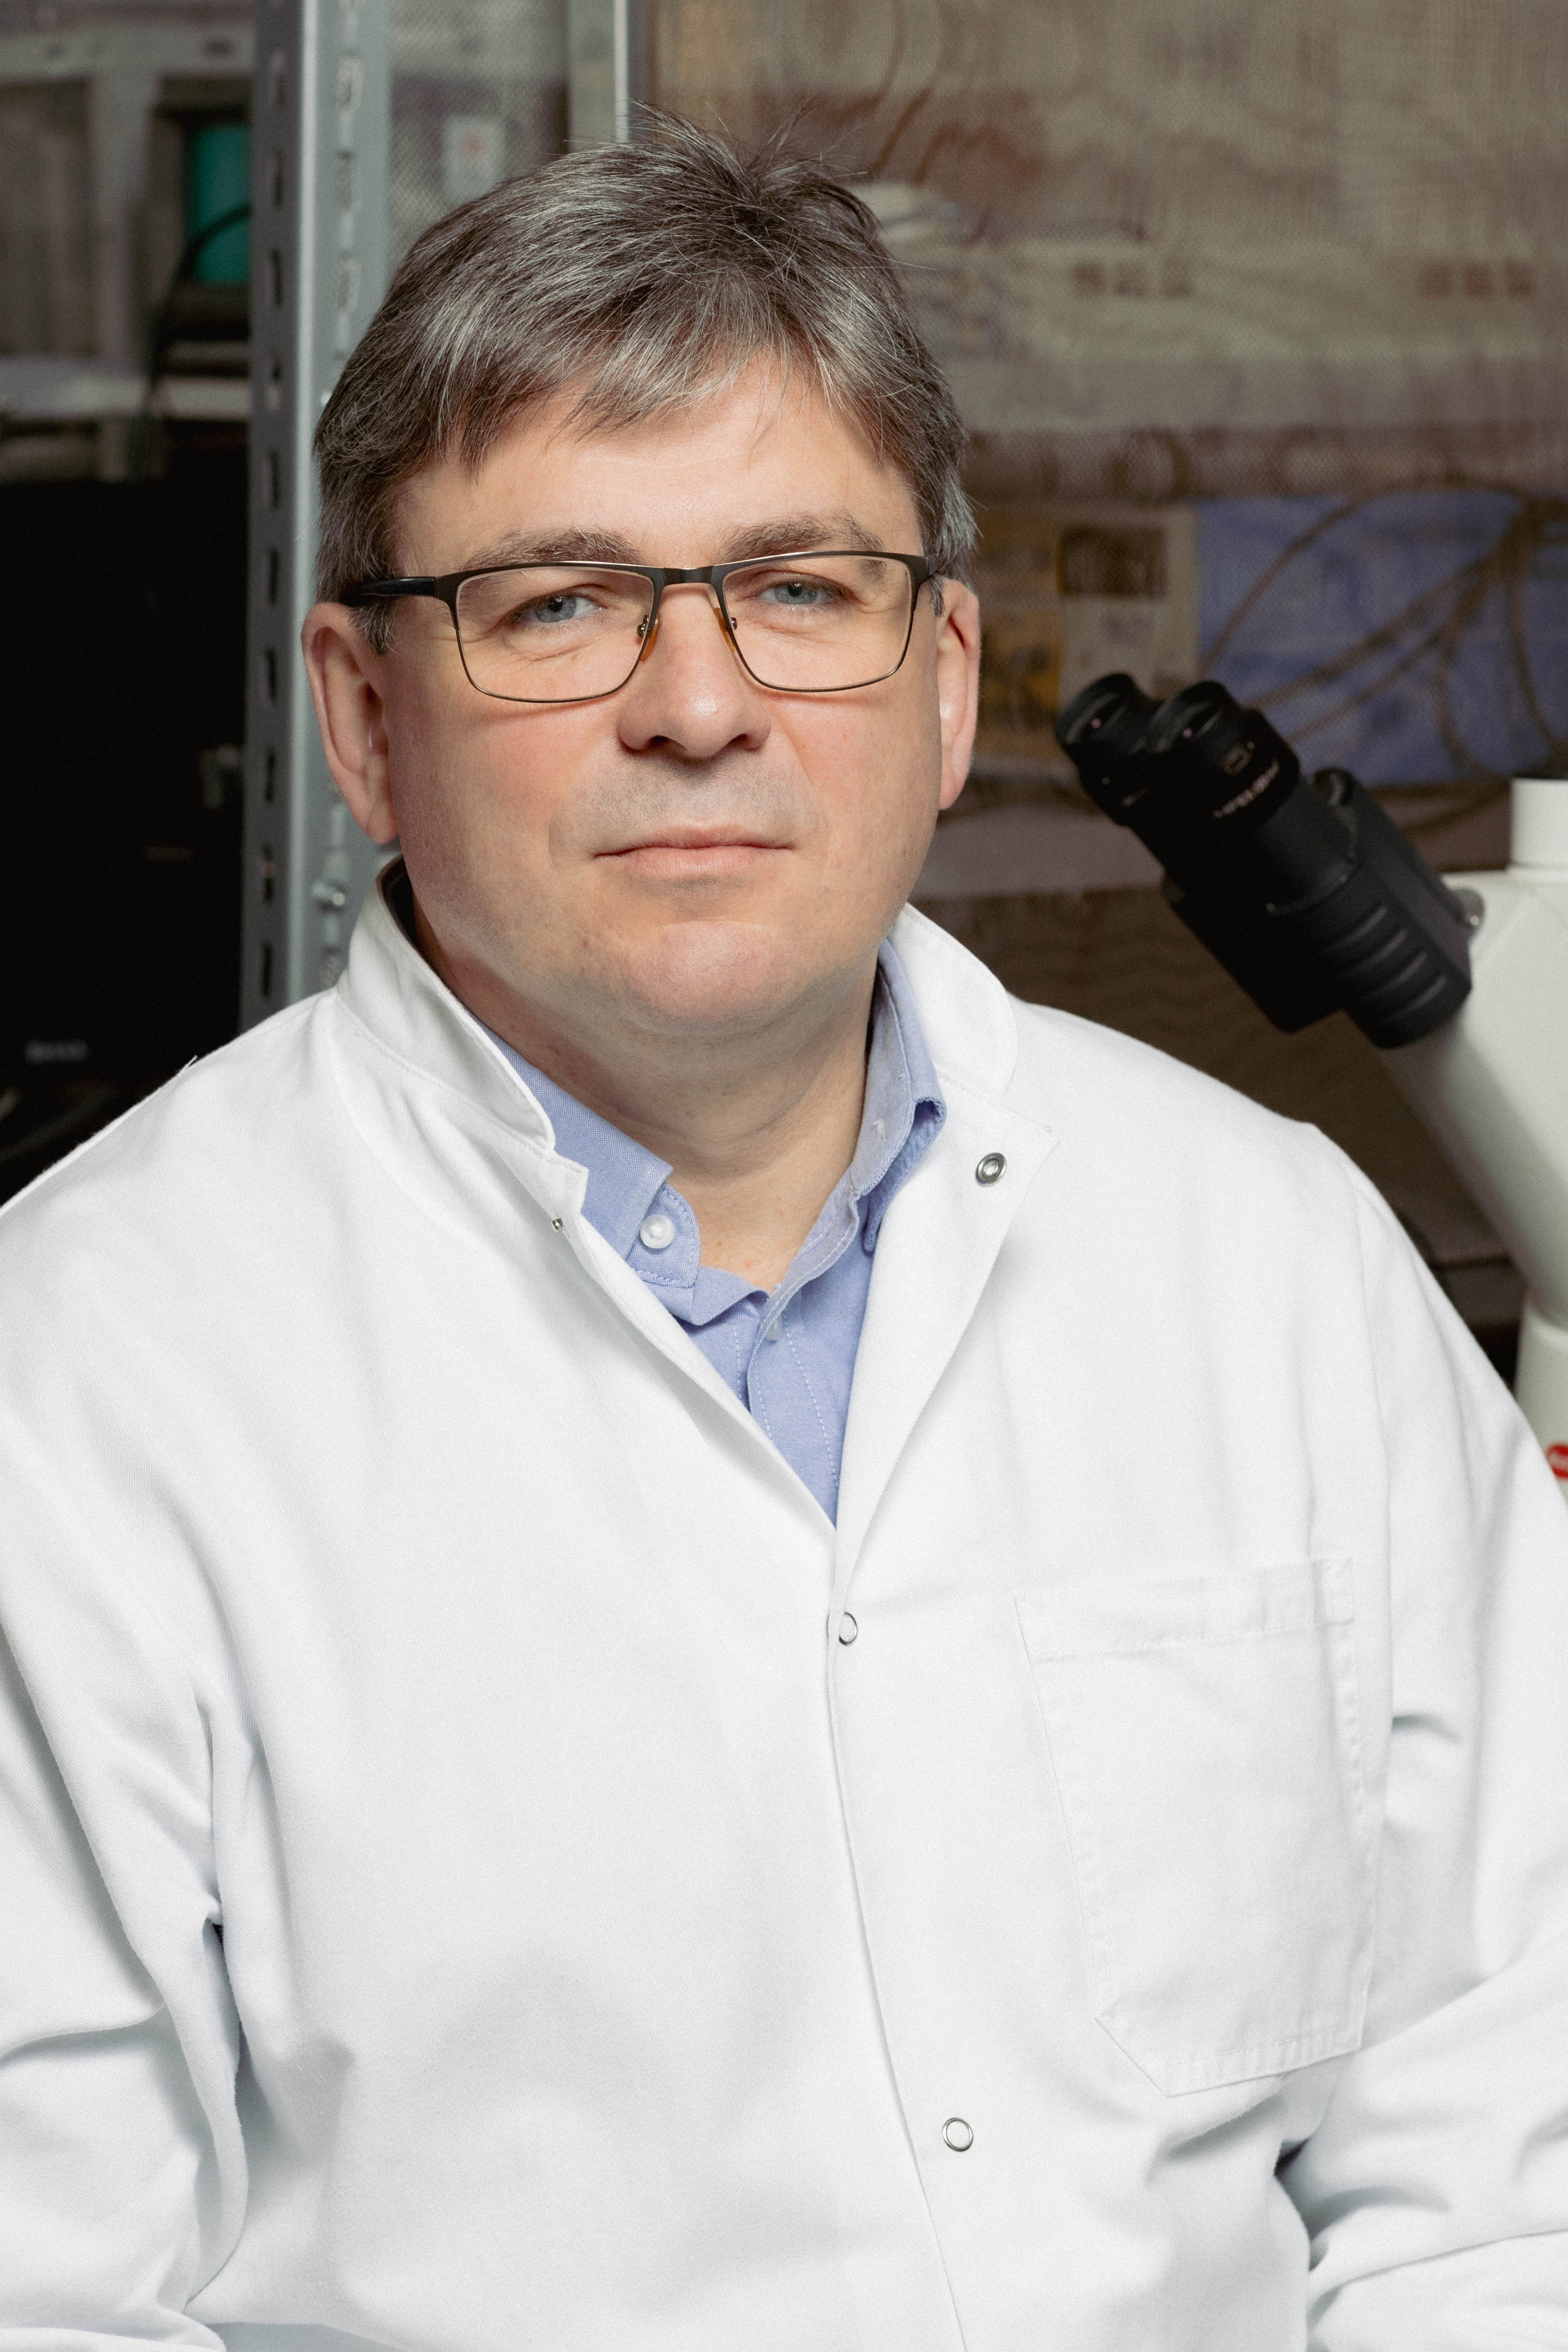 Vladimir Matchkov's research project focuses on regulating the blood flow in the brain and thromboses there, and the results may benefit people with Alzheimer's disease, diabetes and high blood pressure, for example. 